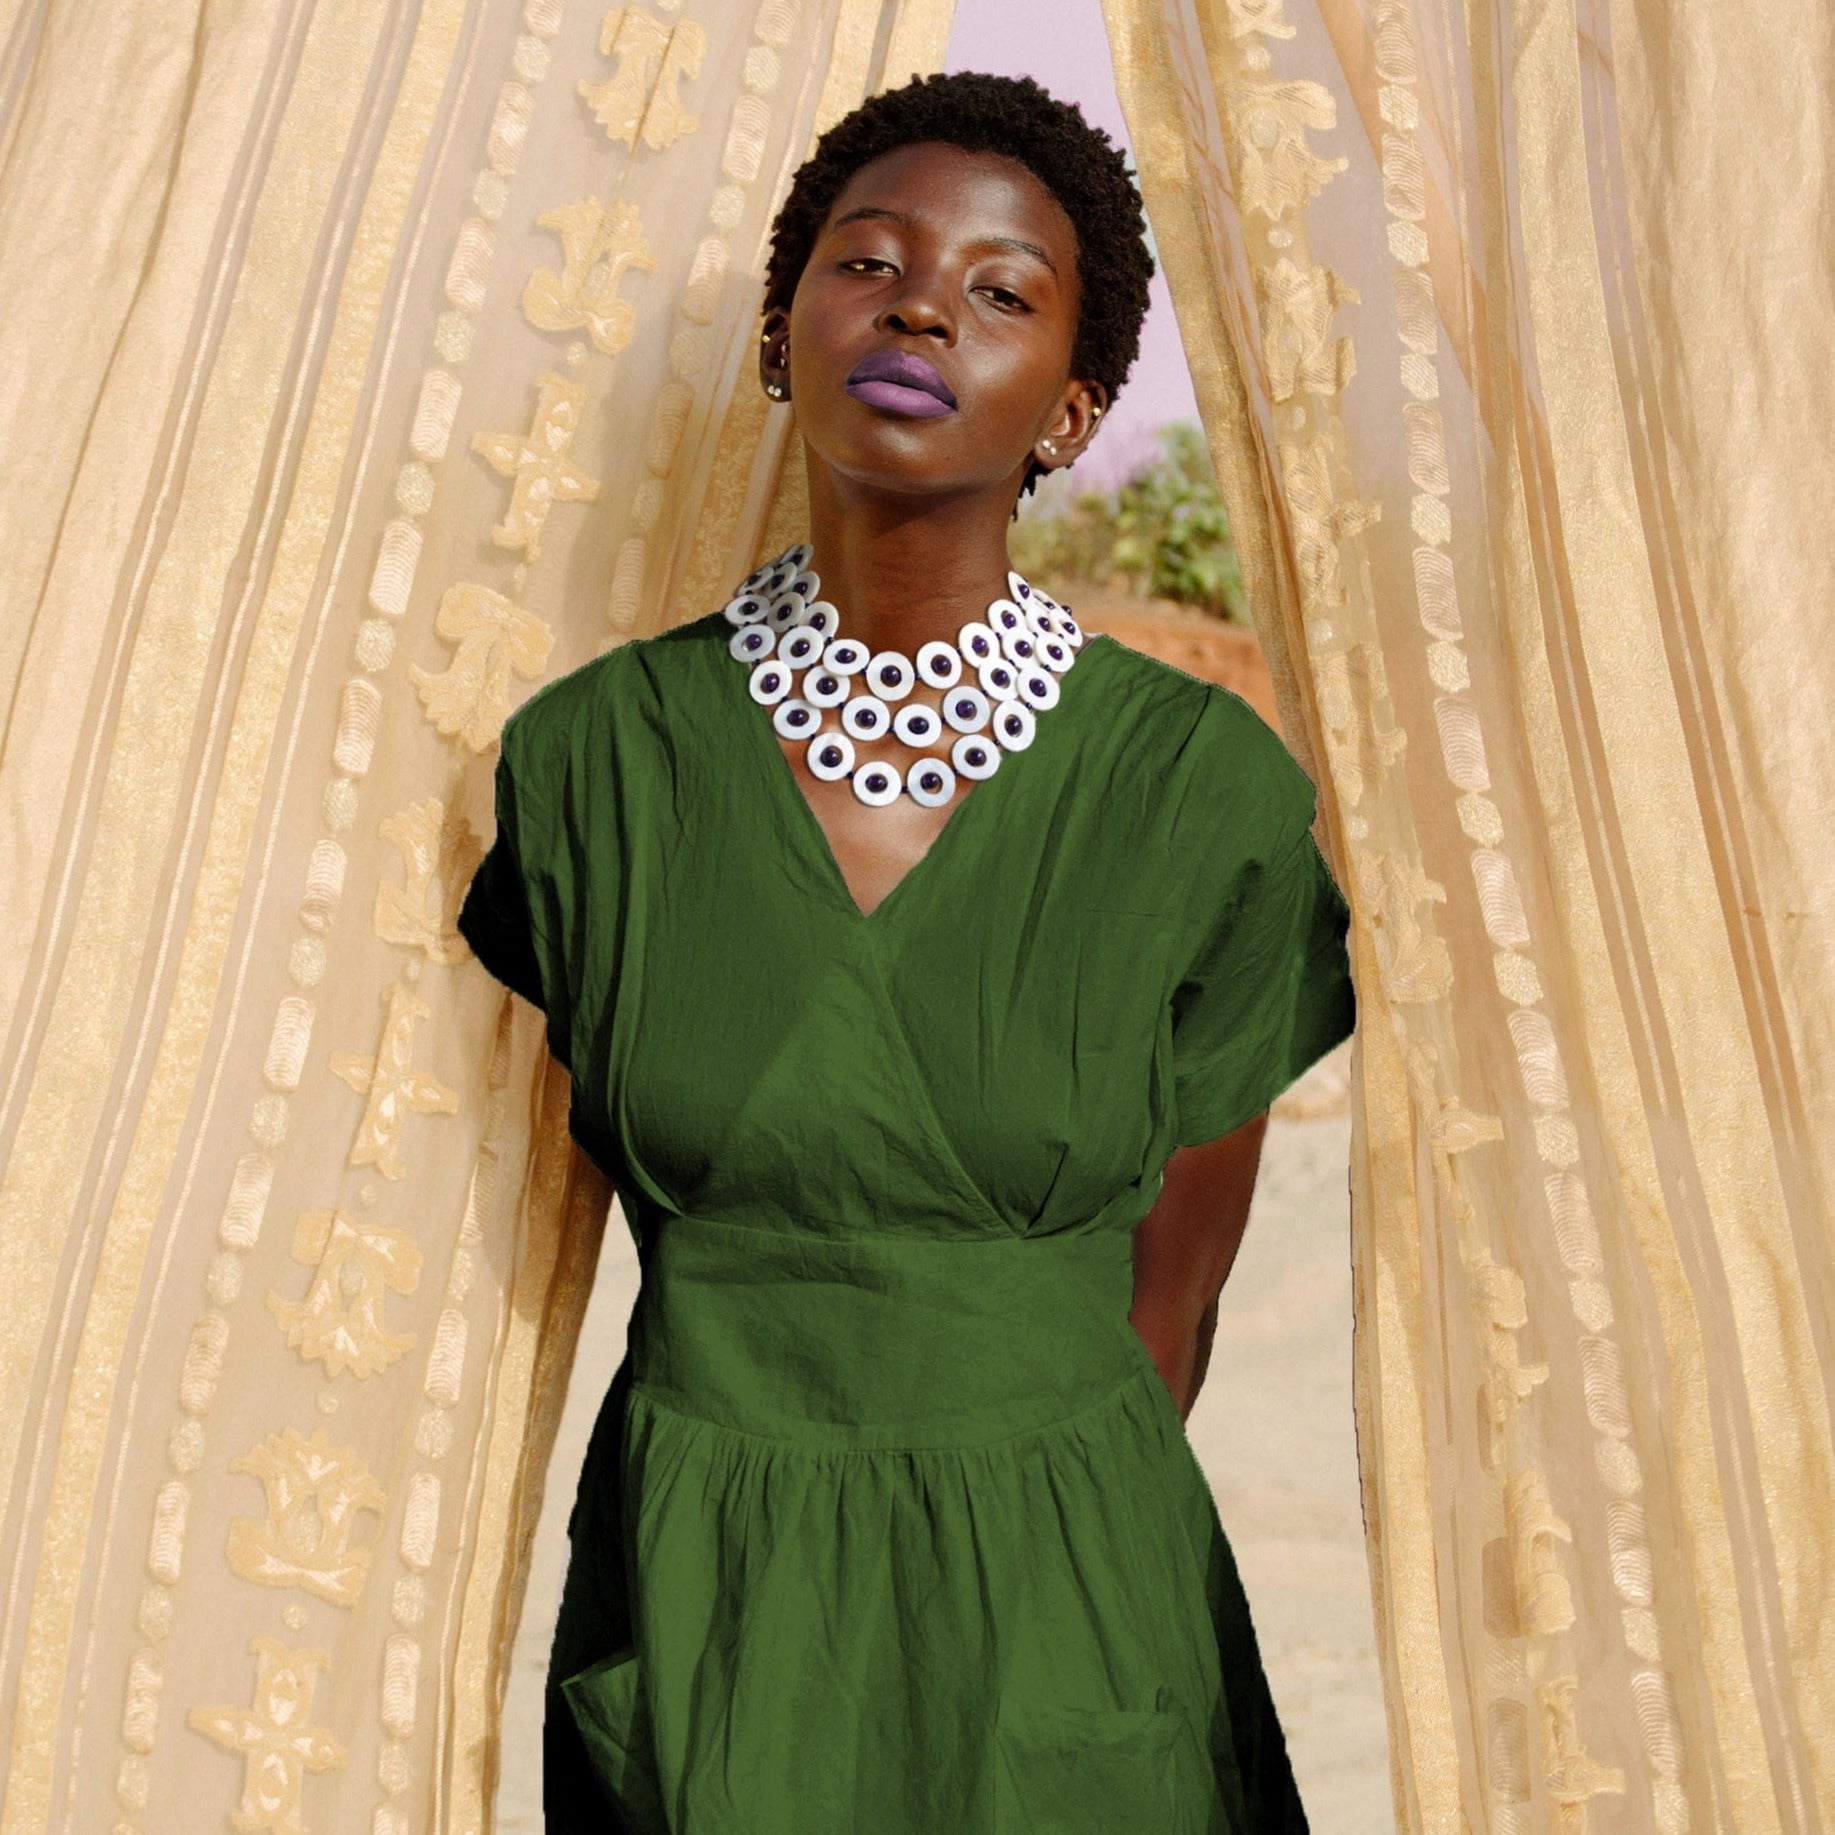 Model wearing green dress with Amethyst shell necklace on